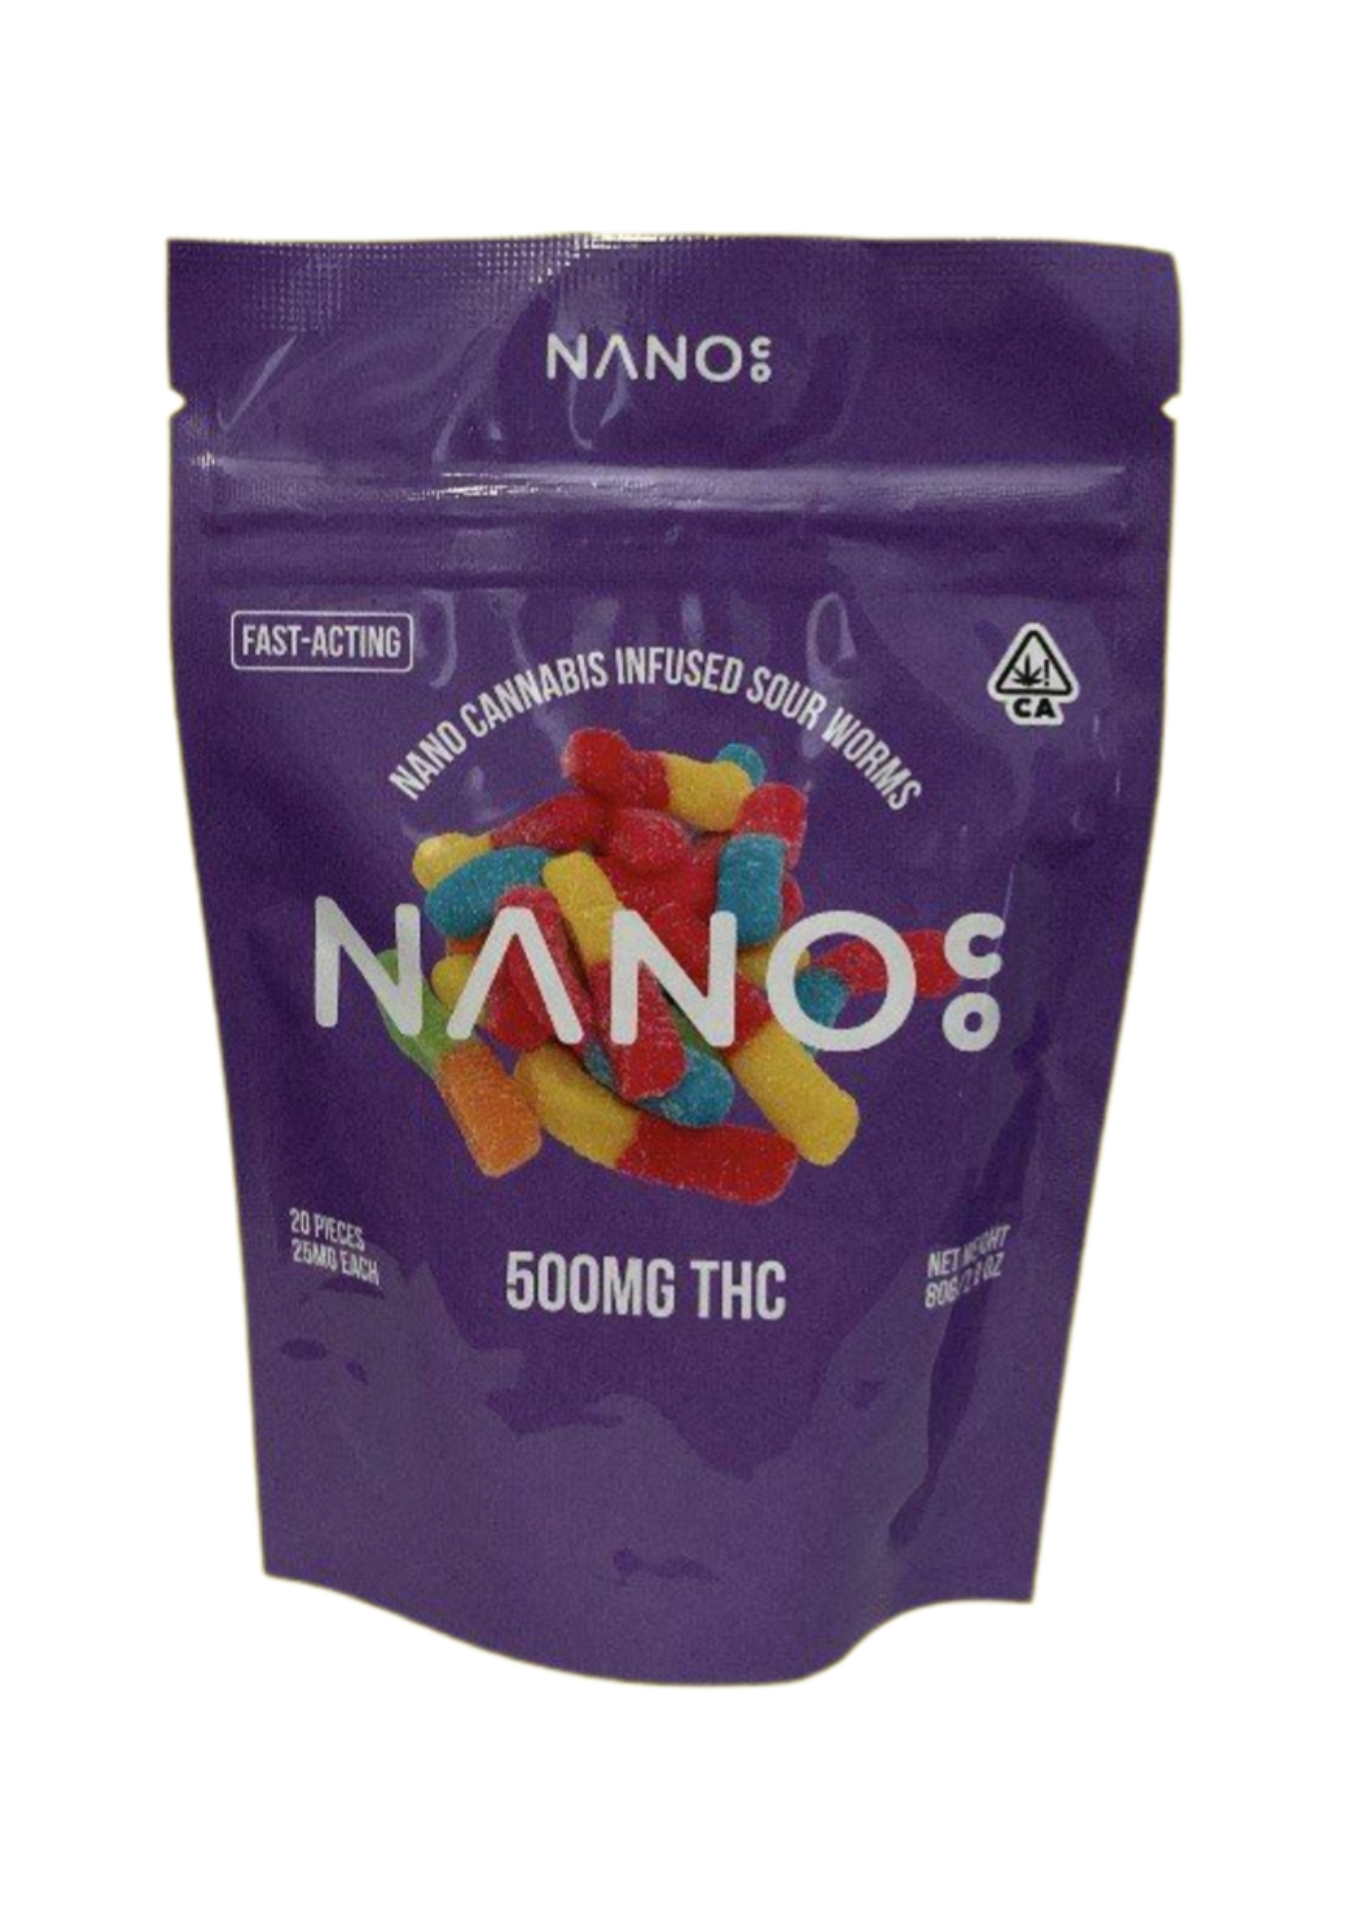 Nano: THC Infused Sour Worms 500MG